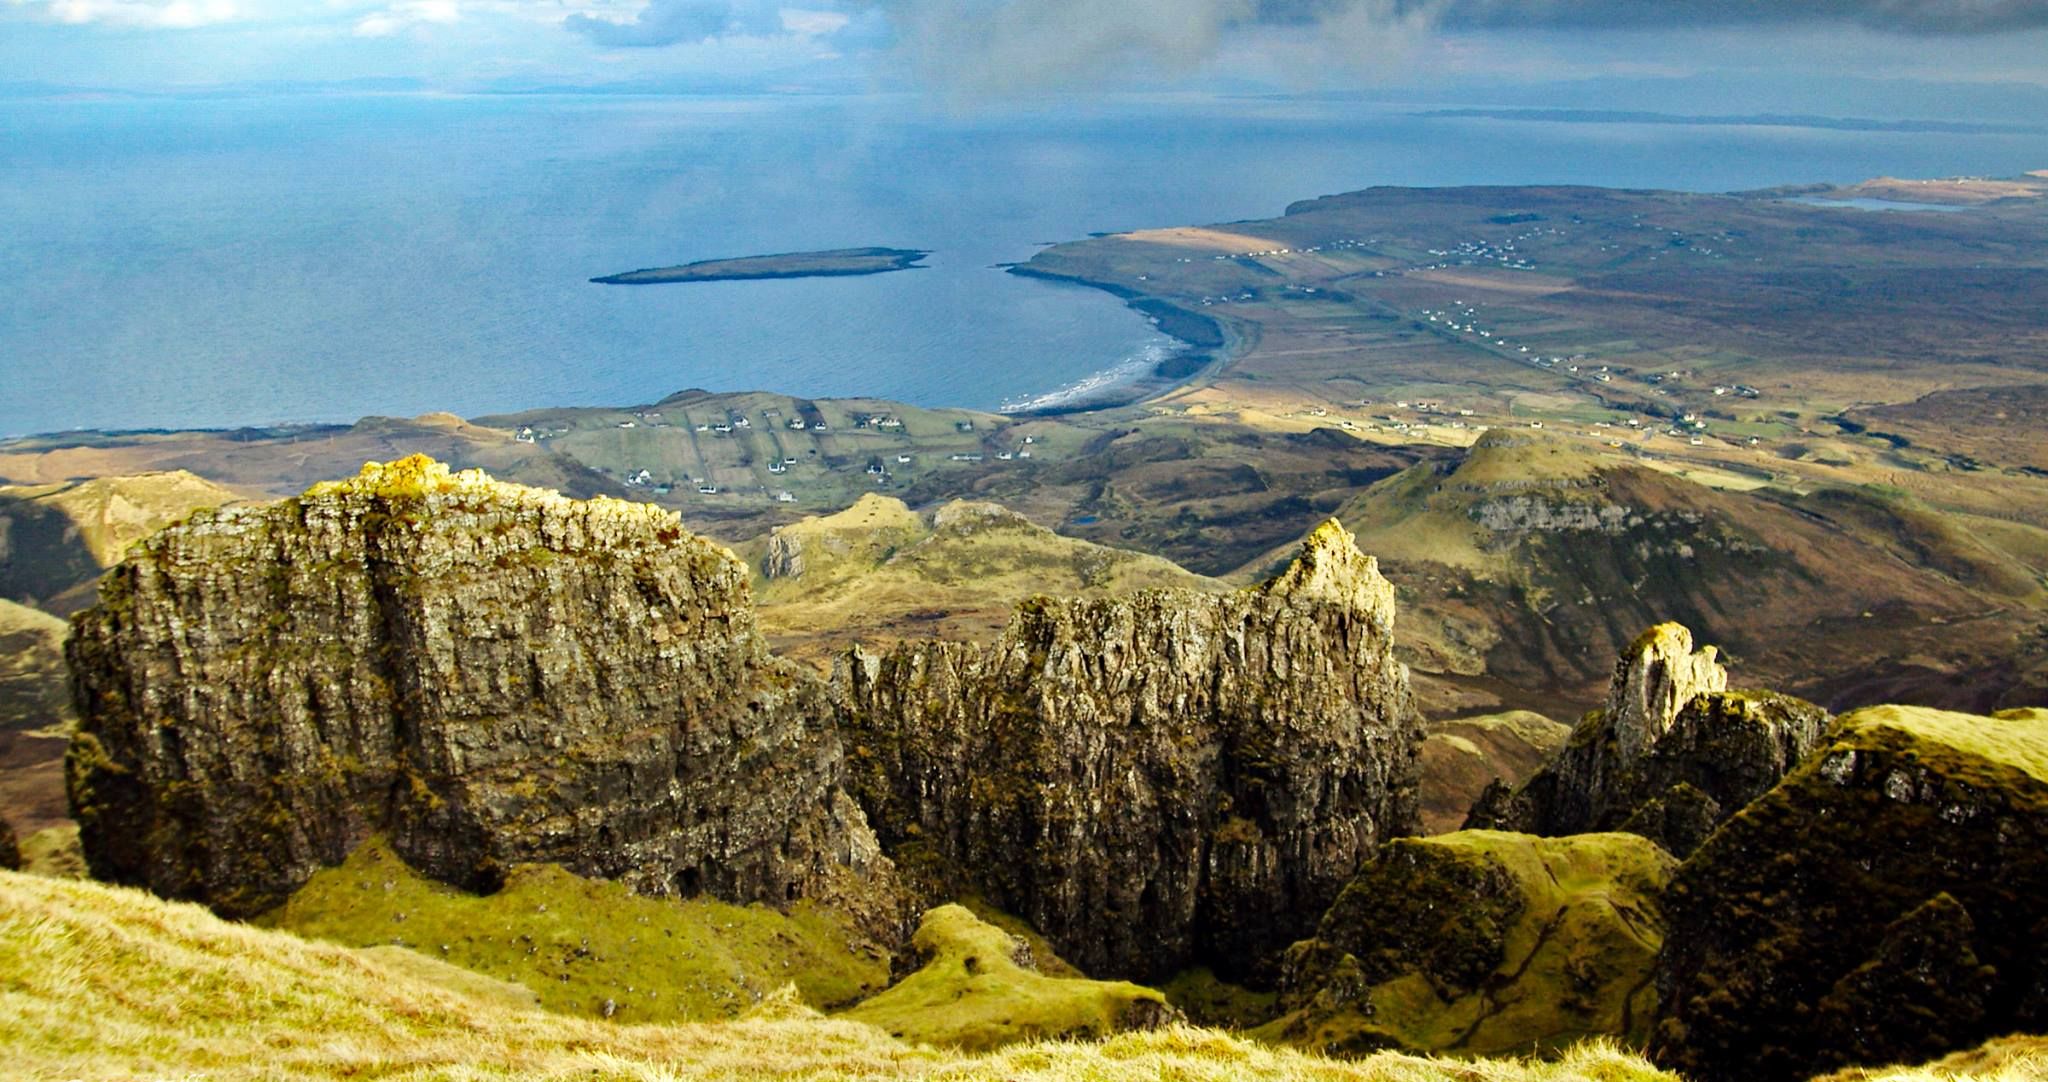 Staffin Bay from The Quiraing on the Isle of Skye